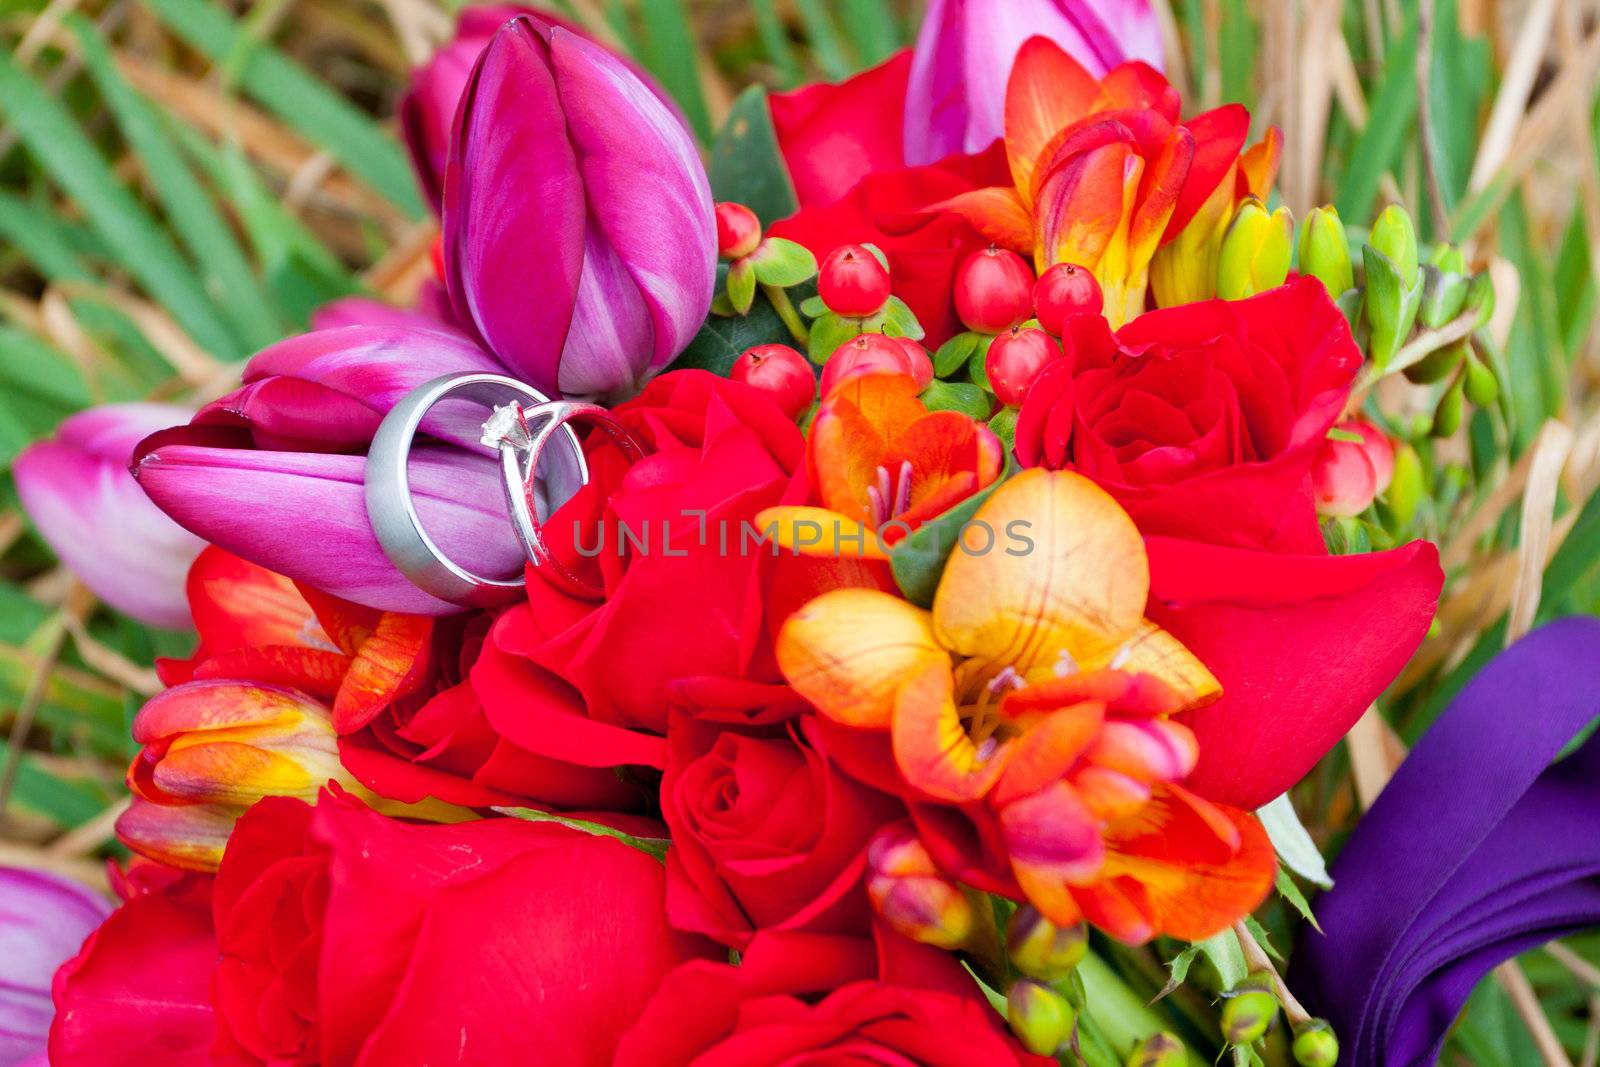 Wedding Rings on Flowers by joshuaraineyphotography